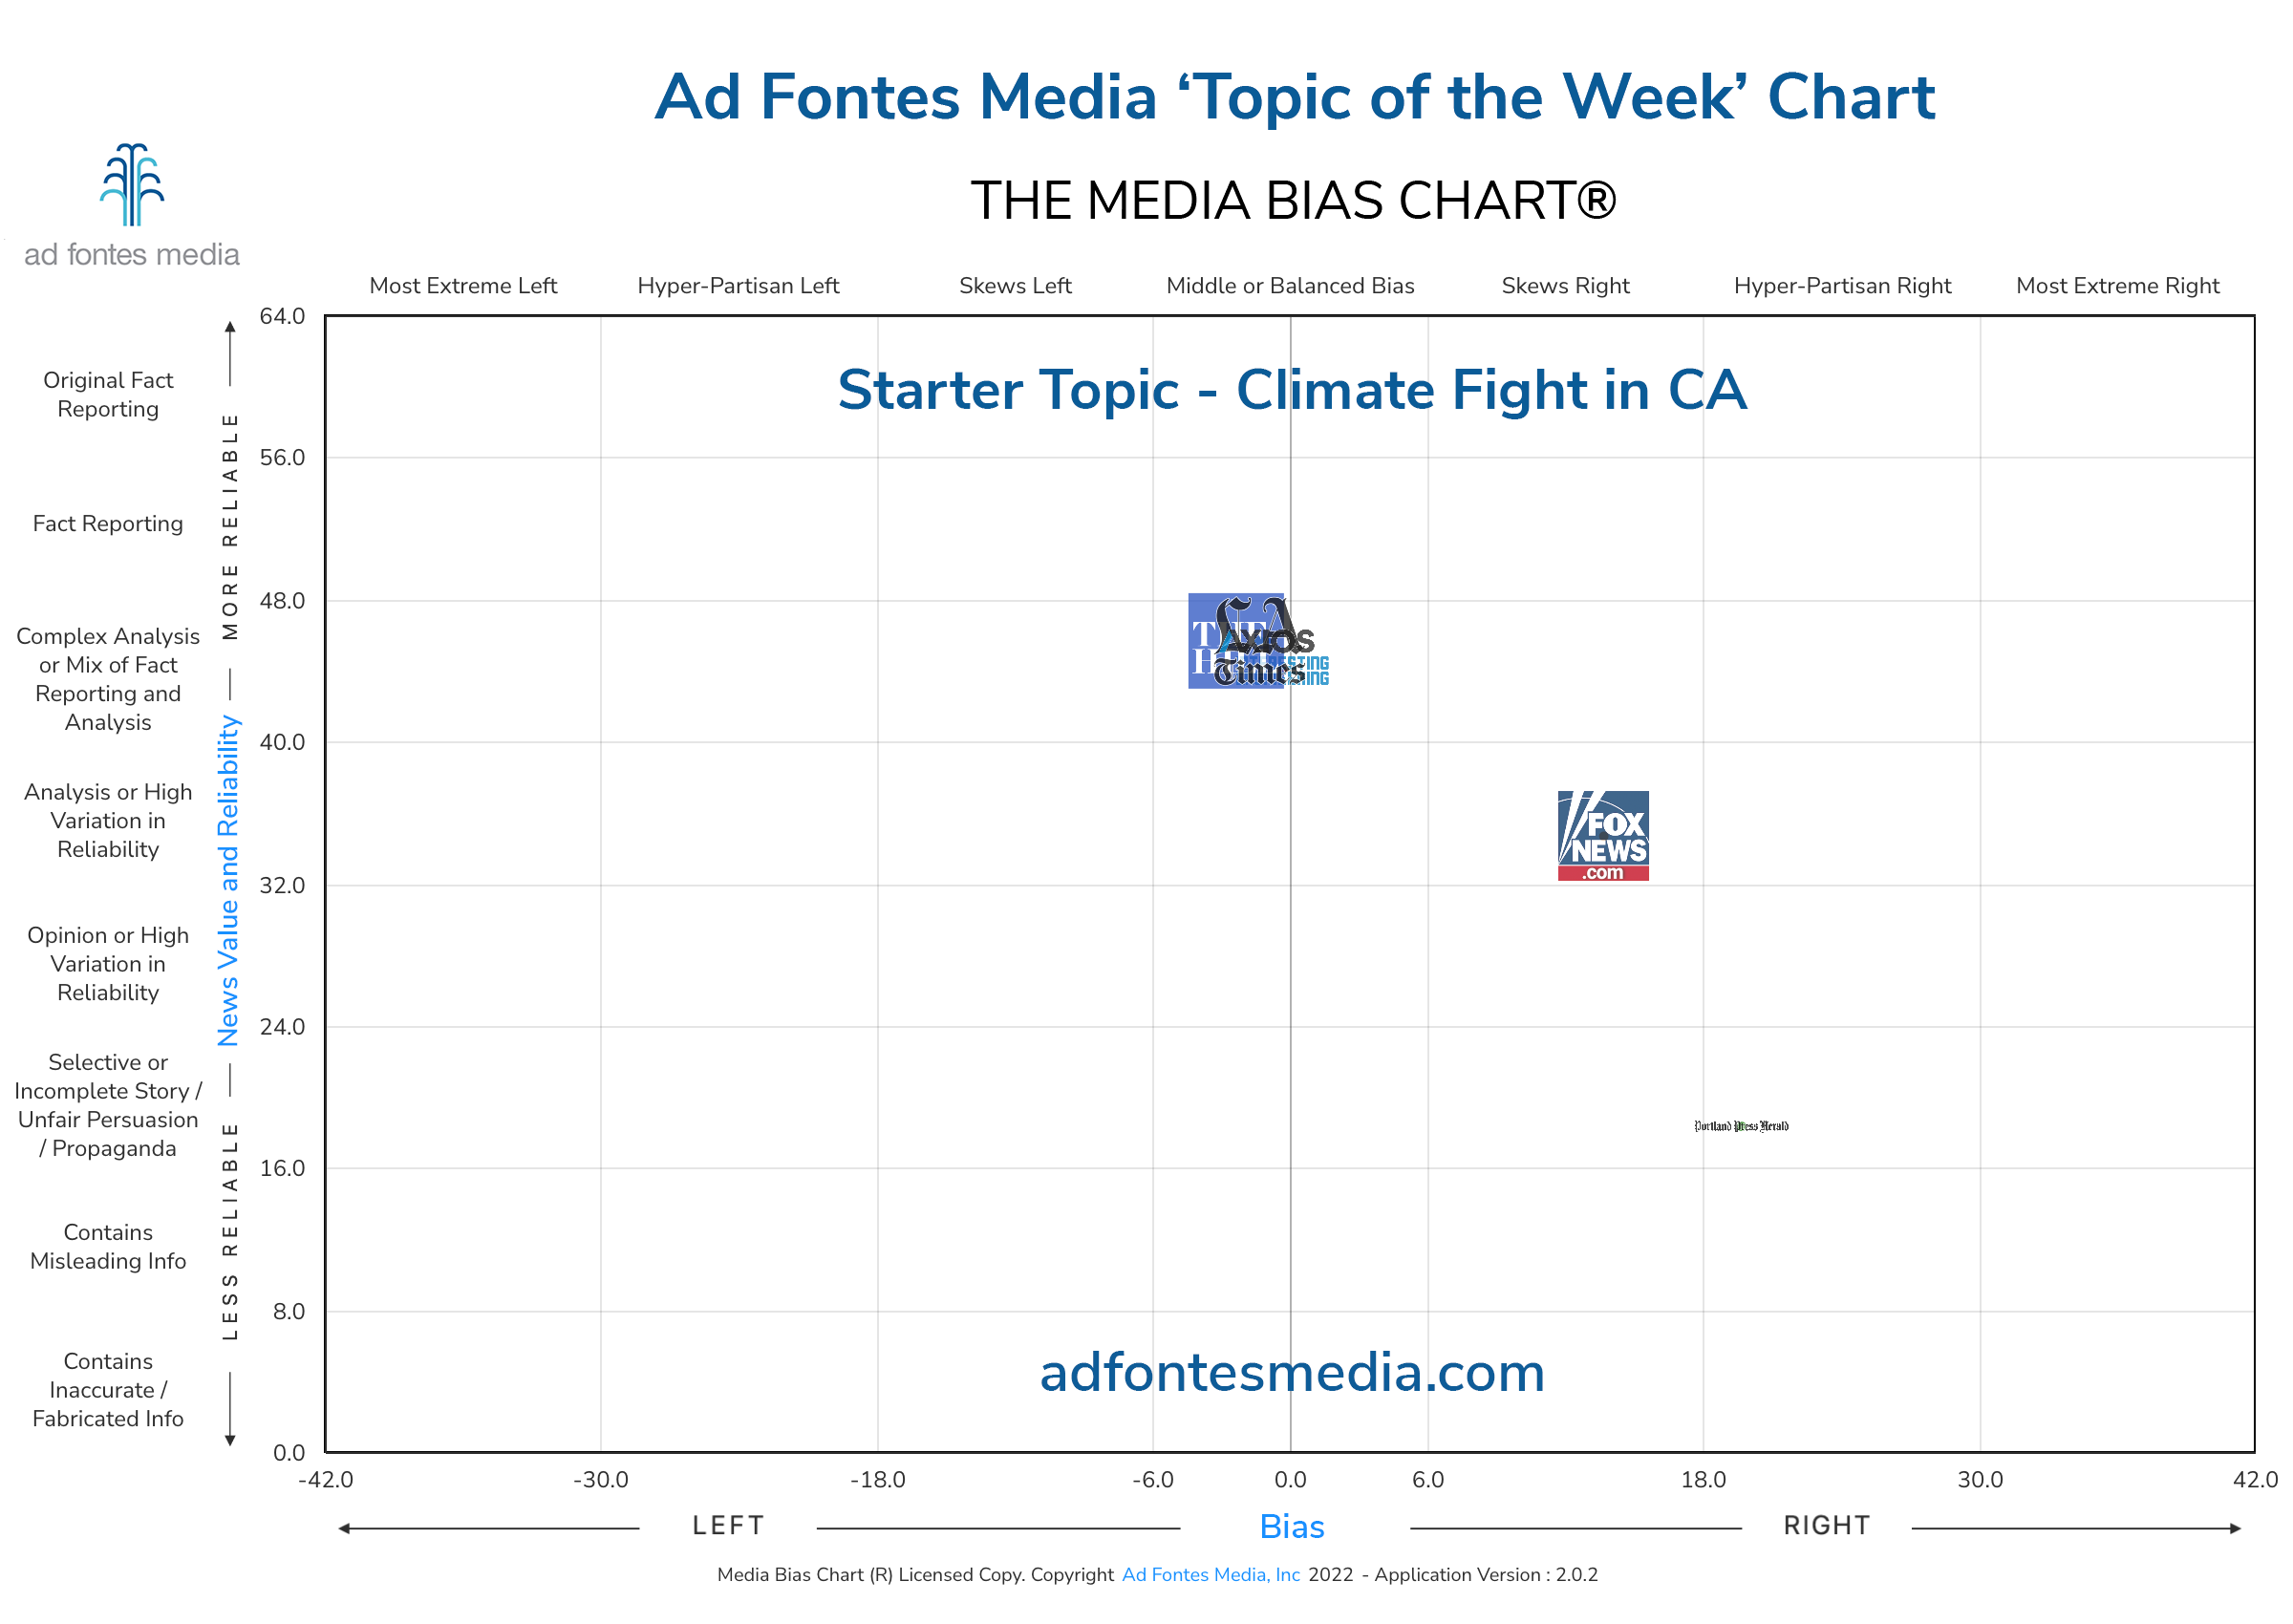 Scores of the Climate Fight in CA articles on the chart